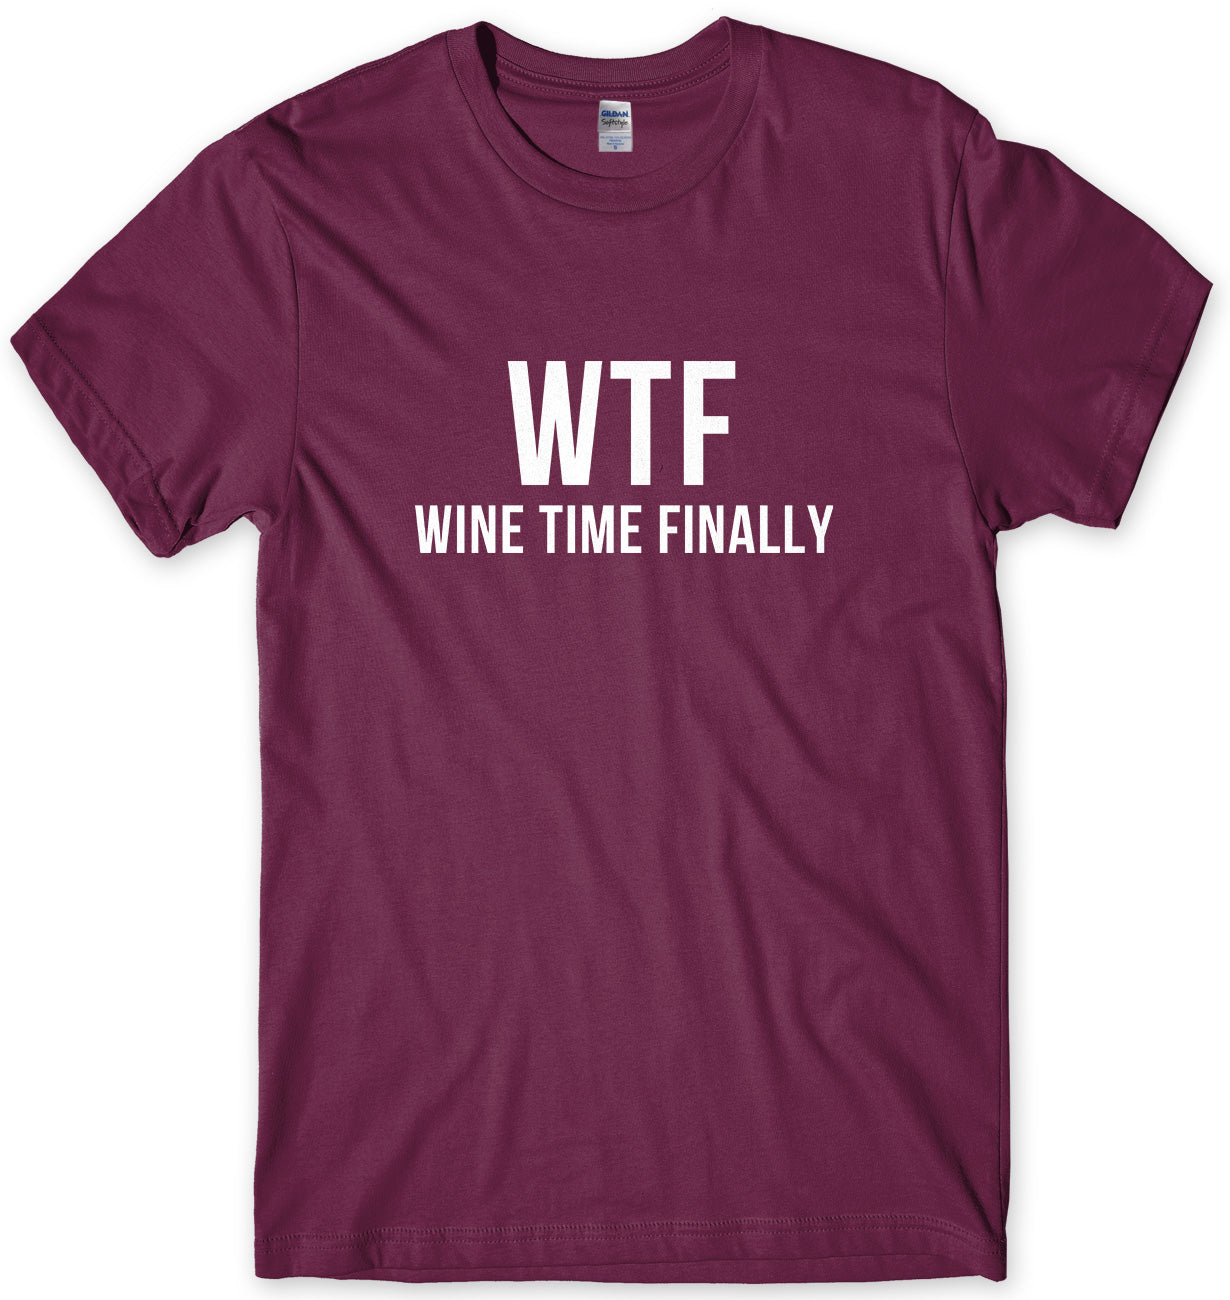 WTF Wine Time Finally Mens Unisex T-Shirt